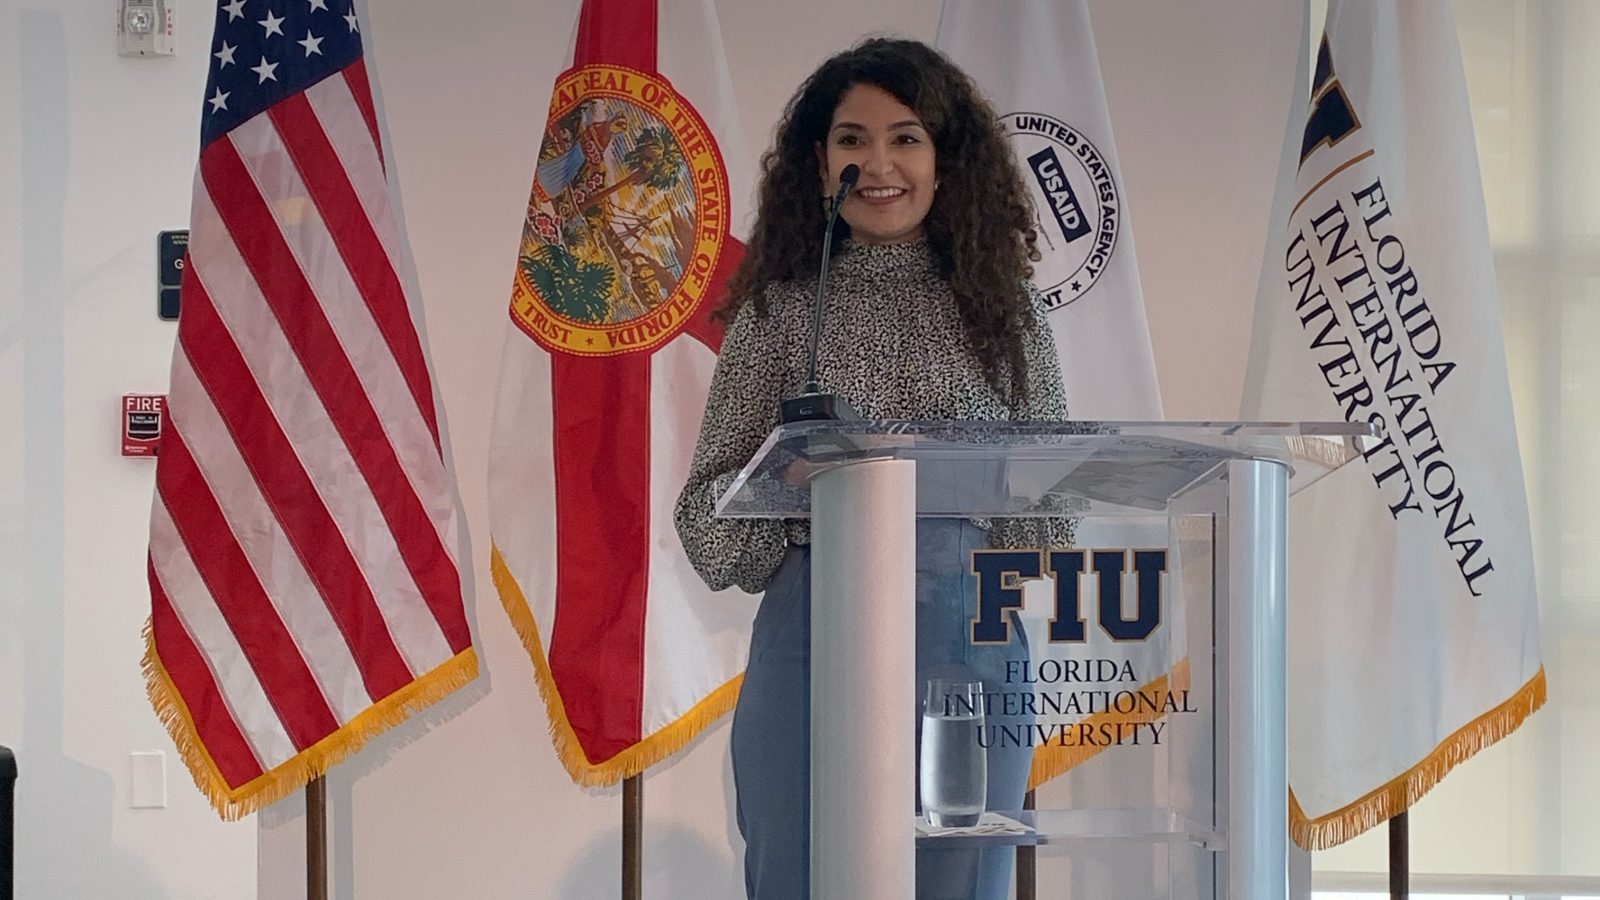 Pierina standing at a glass Florida International University podium in front of an American, Florida, USAID, and FIU flags